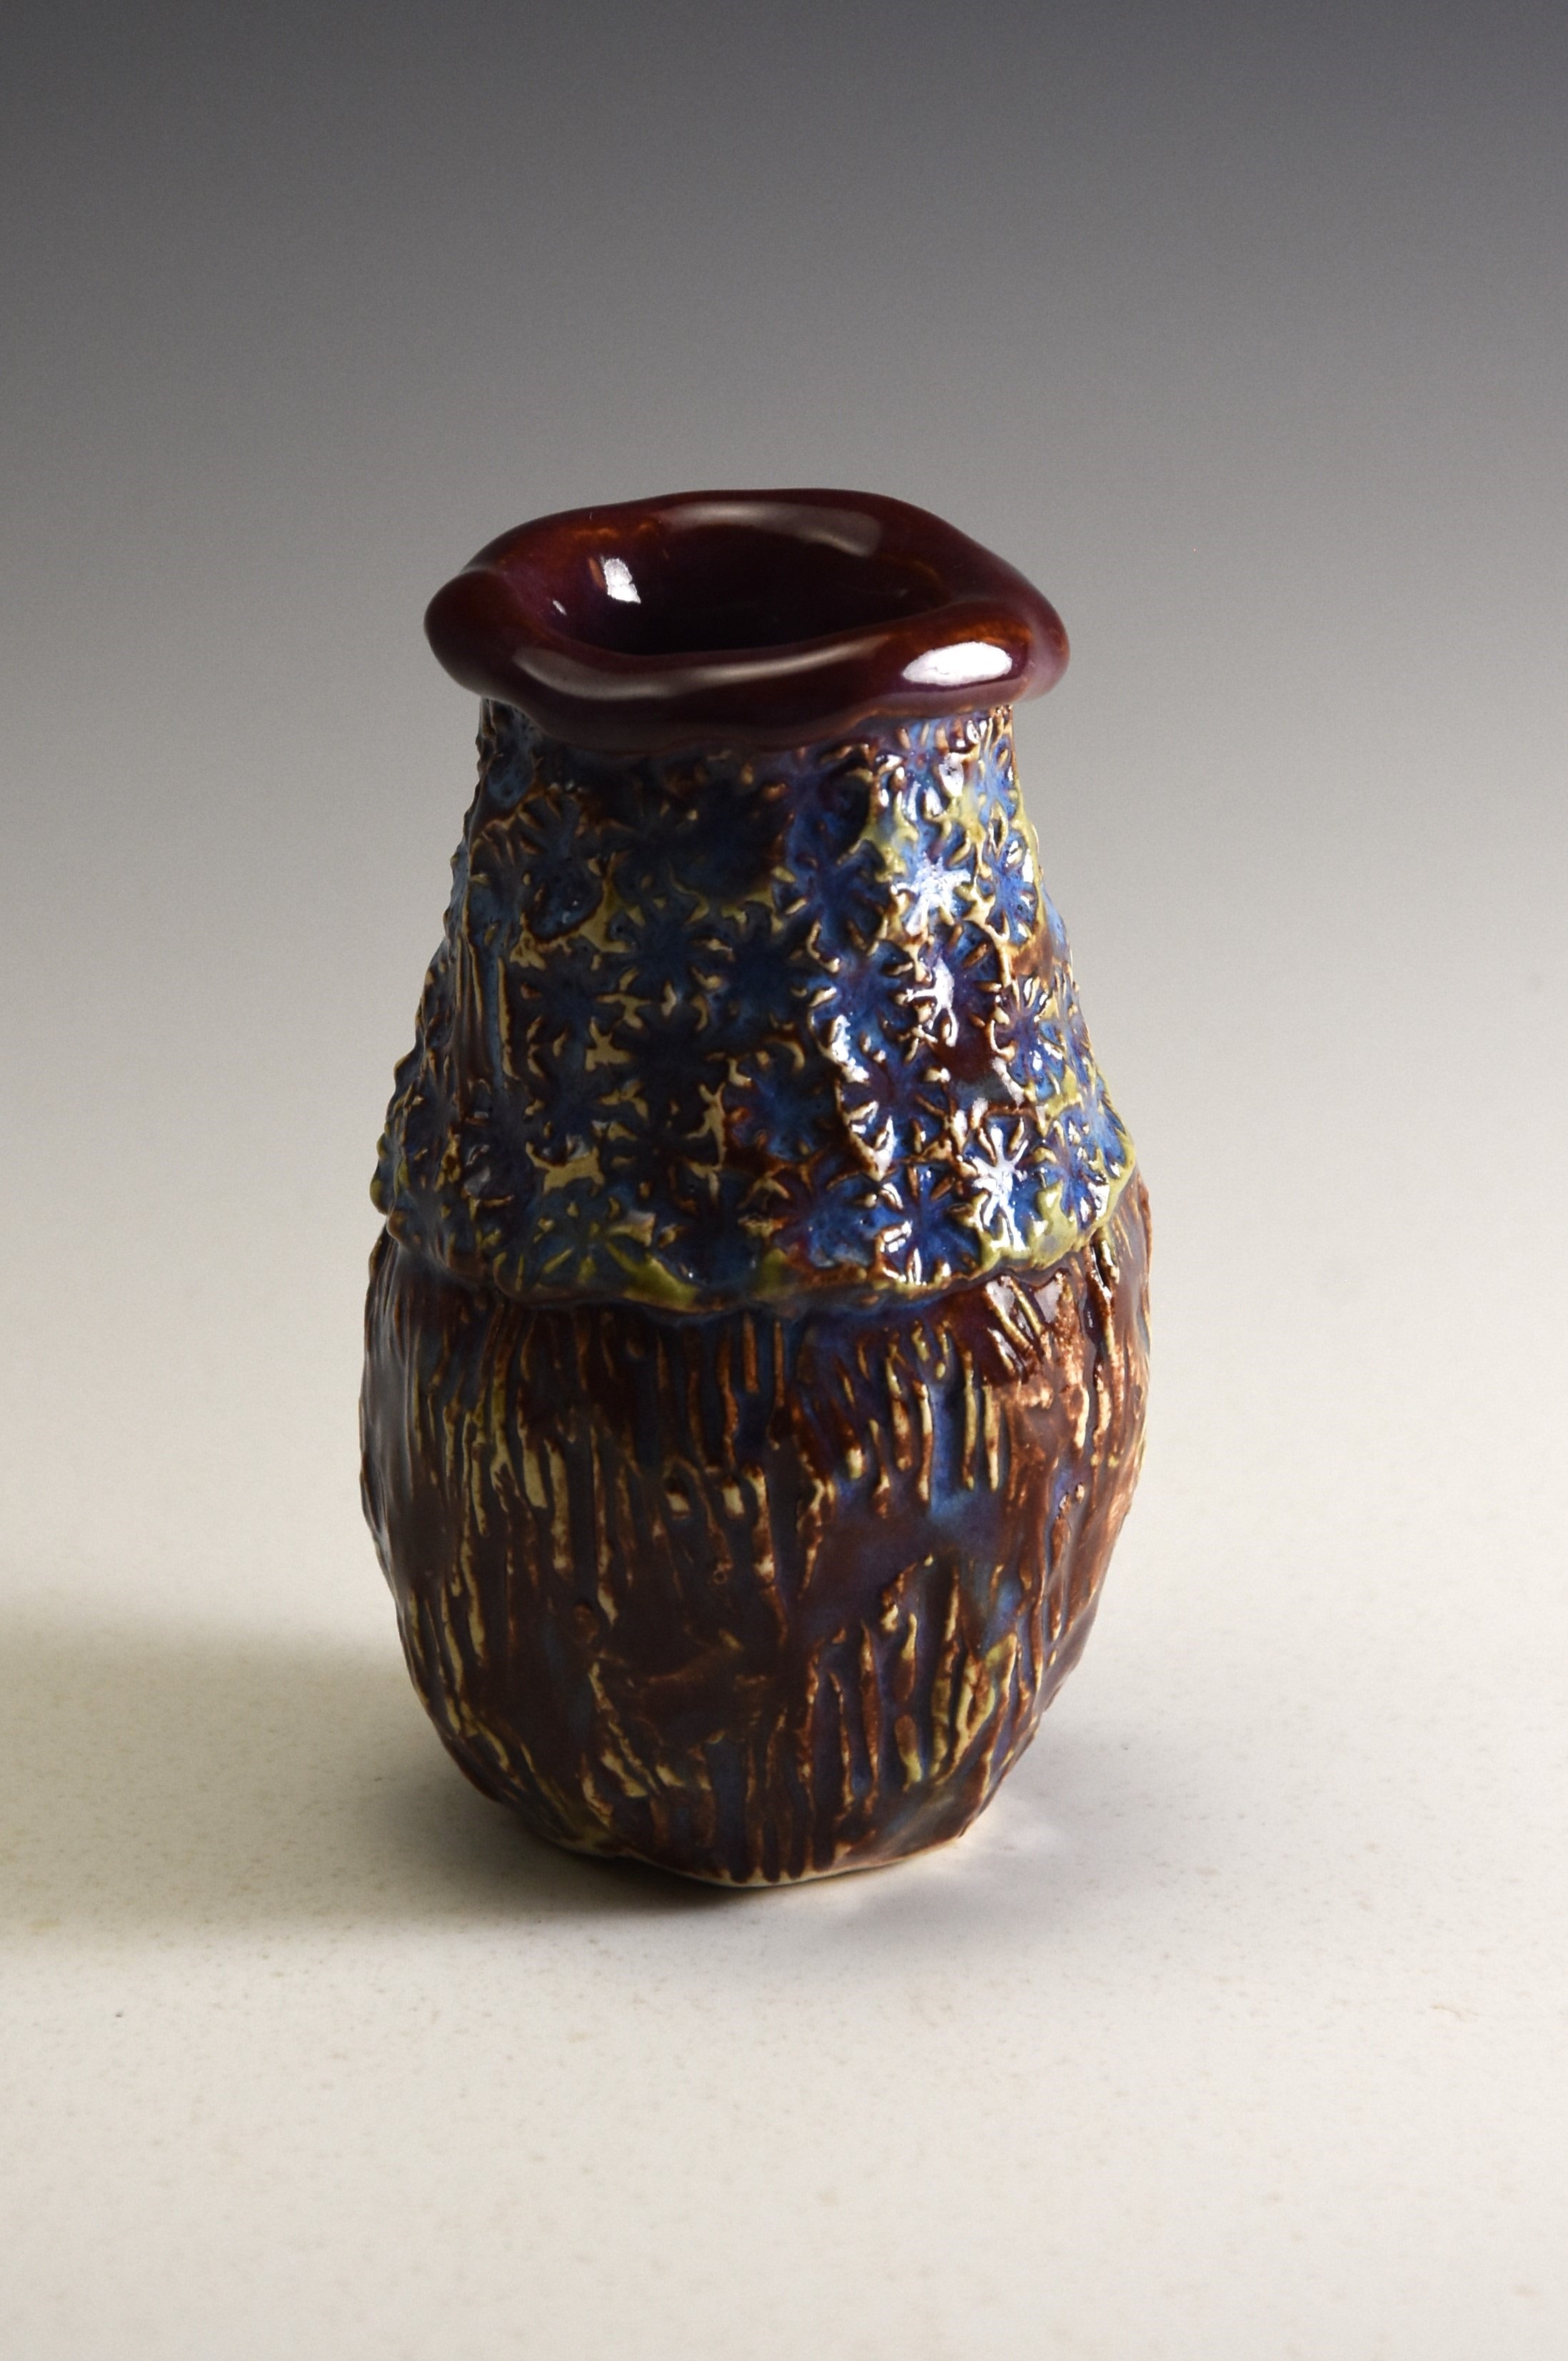 Two textured small vase with light bl. and purple